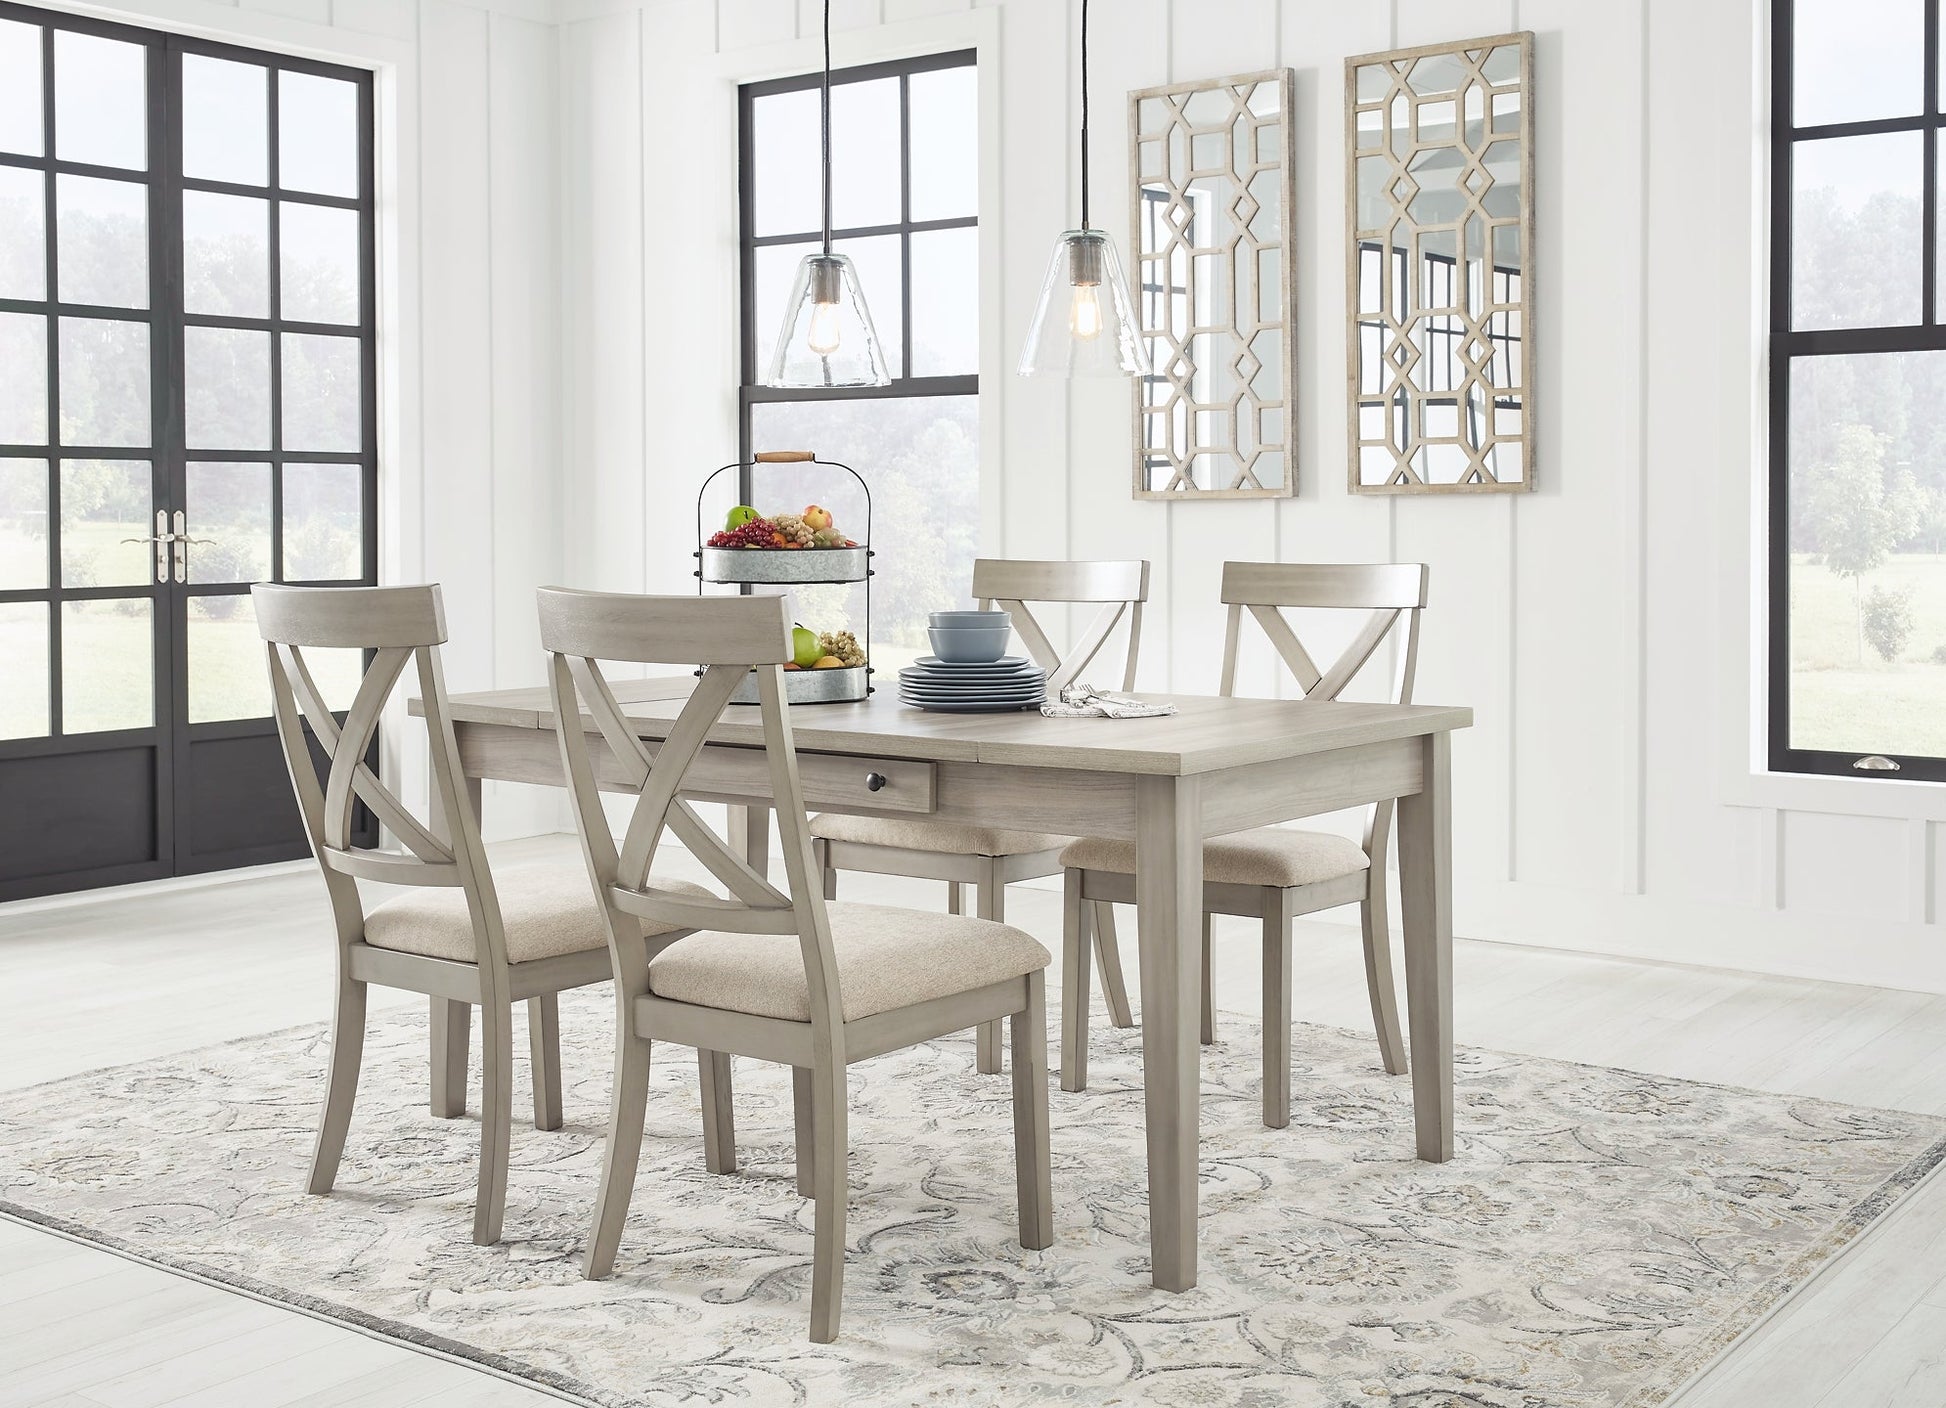 Parellen Dining Table and 4 Chairs at Walker Mattress and Furniture Locations in Cedar Park and Belton TX.